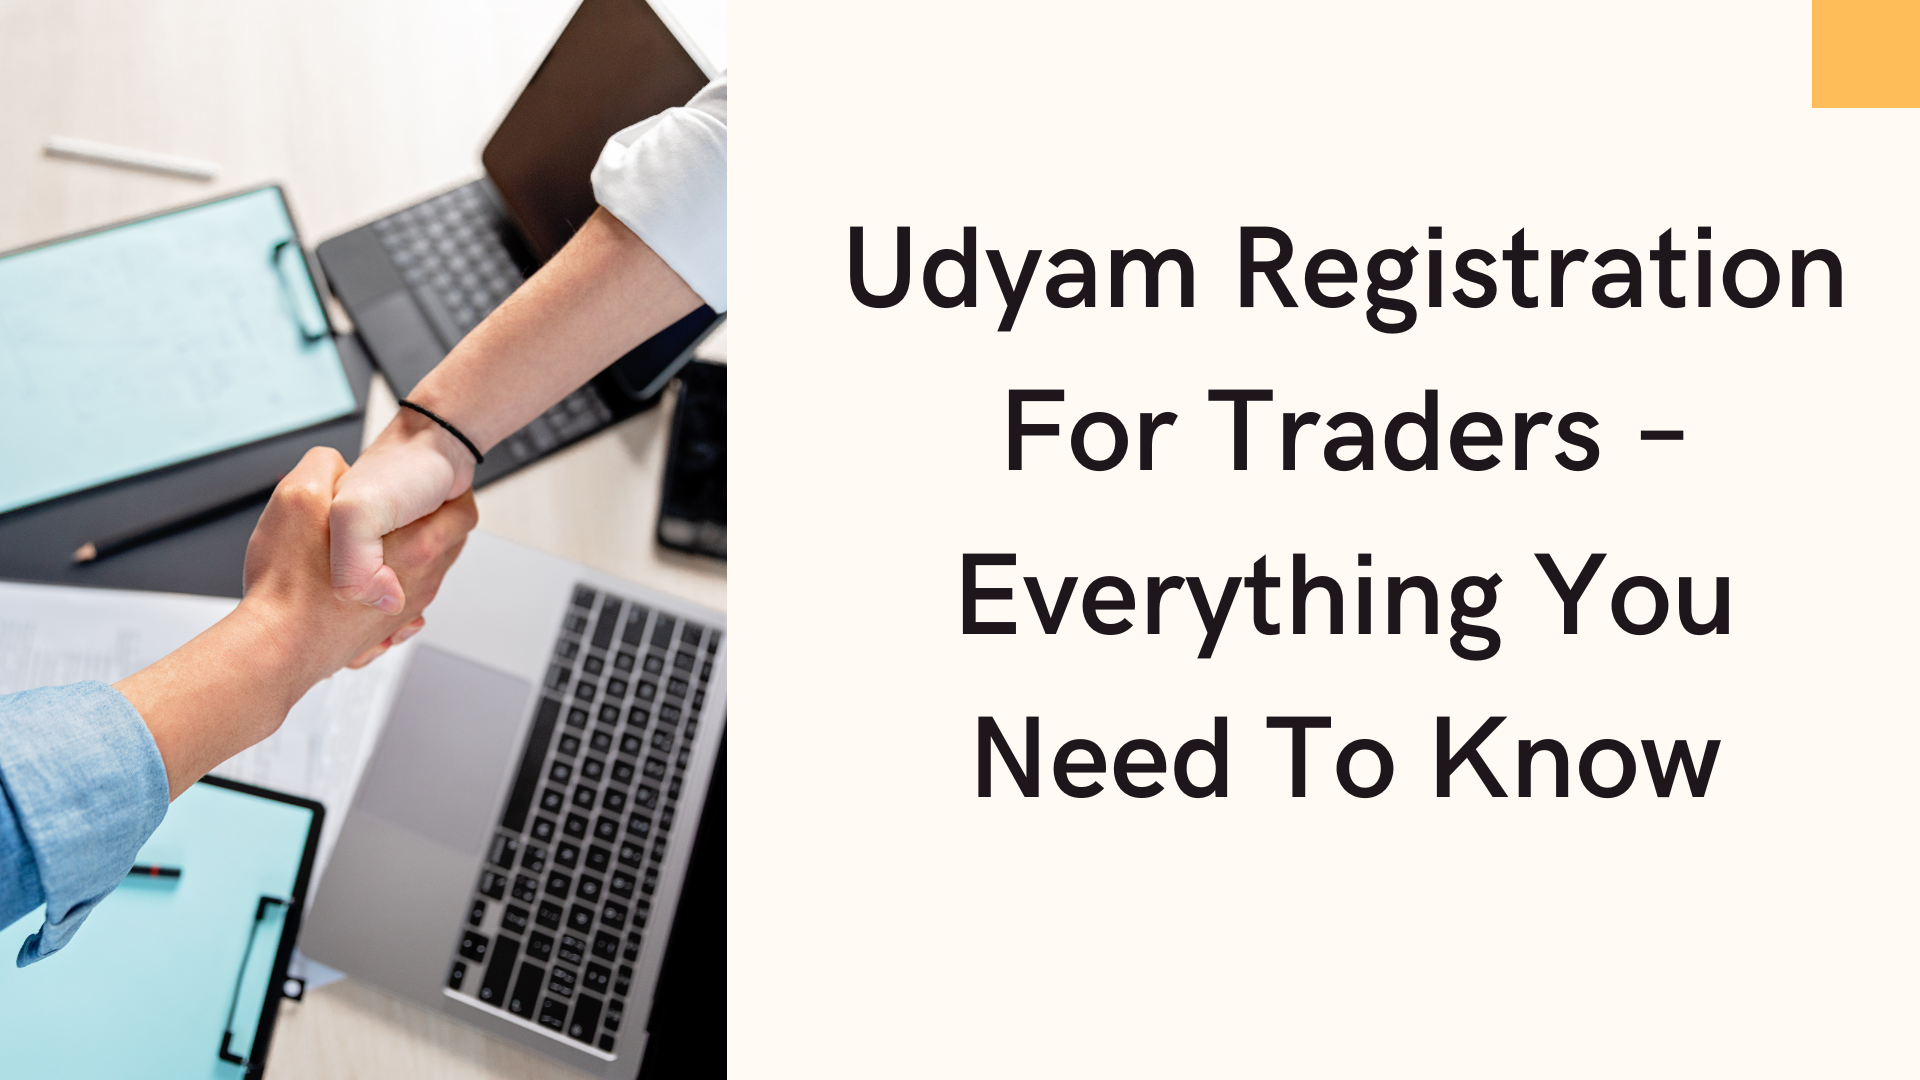 Udyam Registration For Traders – Everything You Need To Know